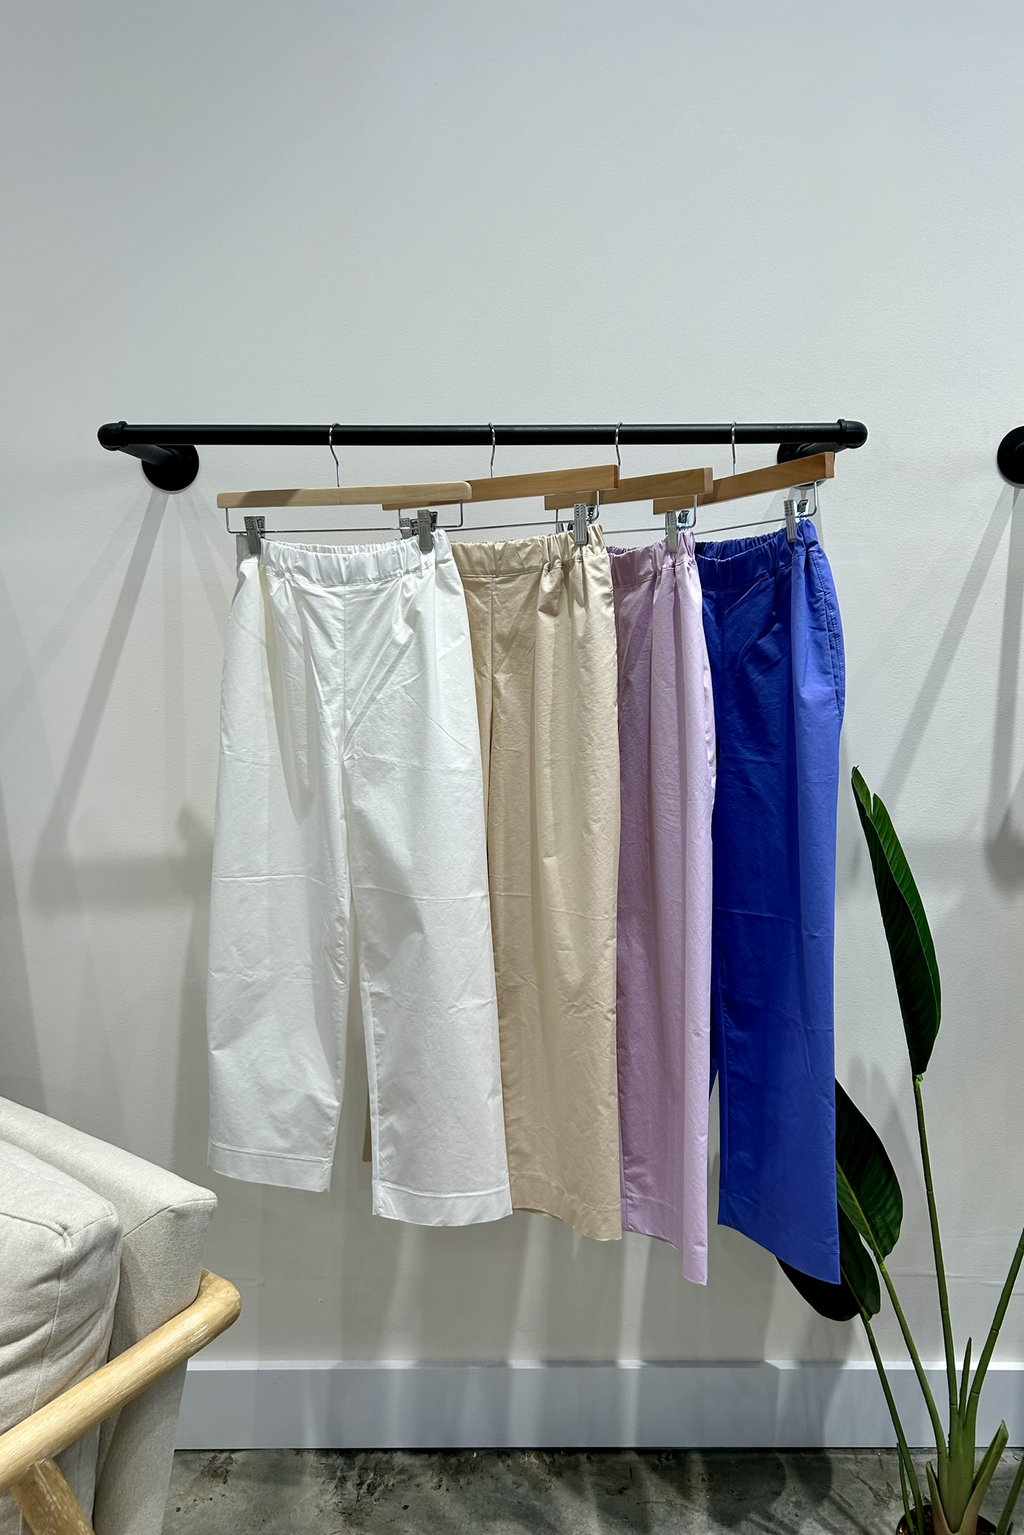 Cotton Stretch Relaxed Fit Pants